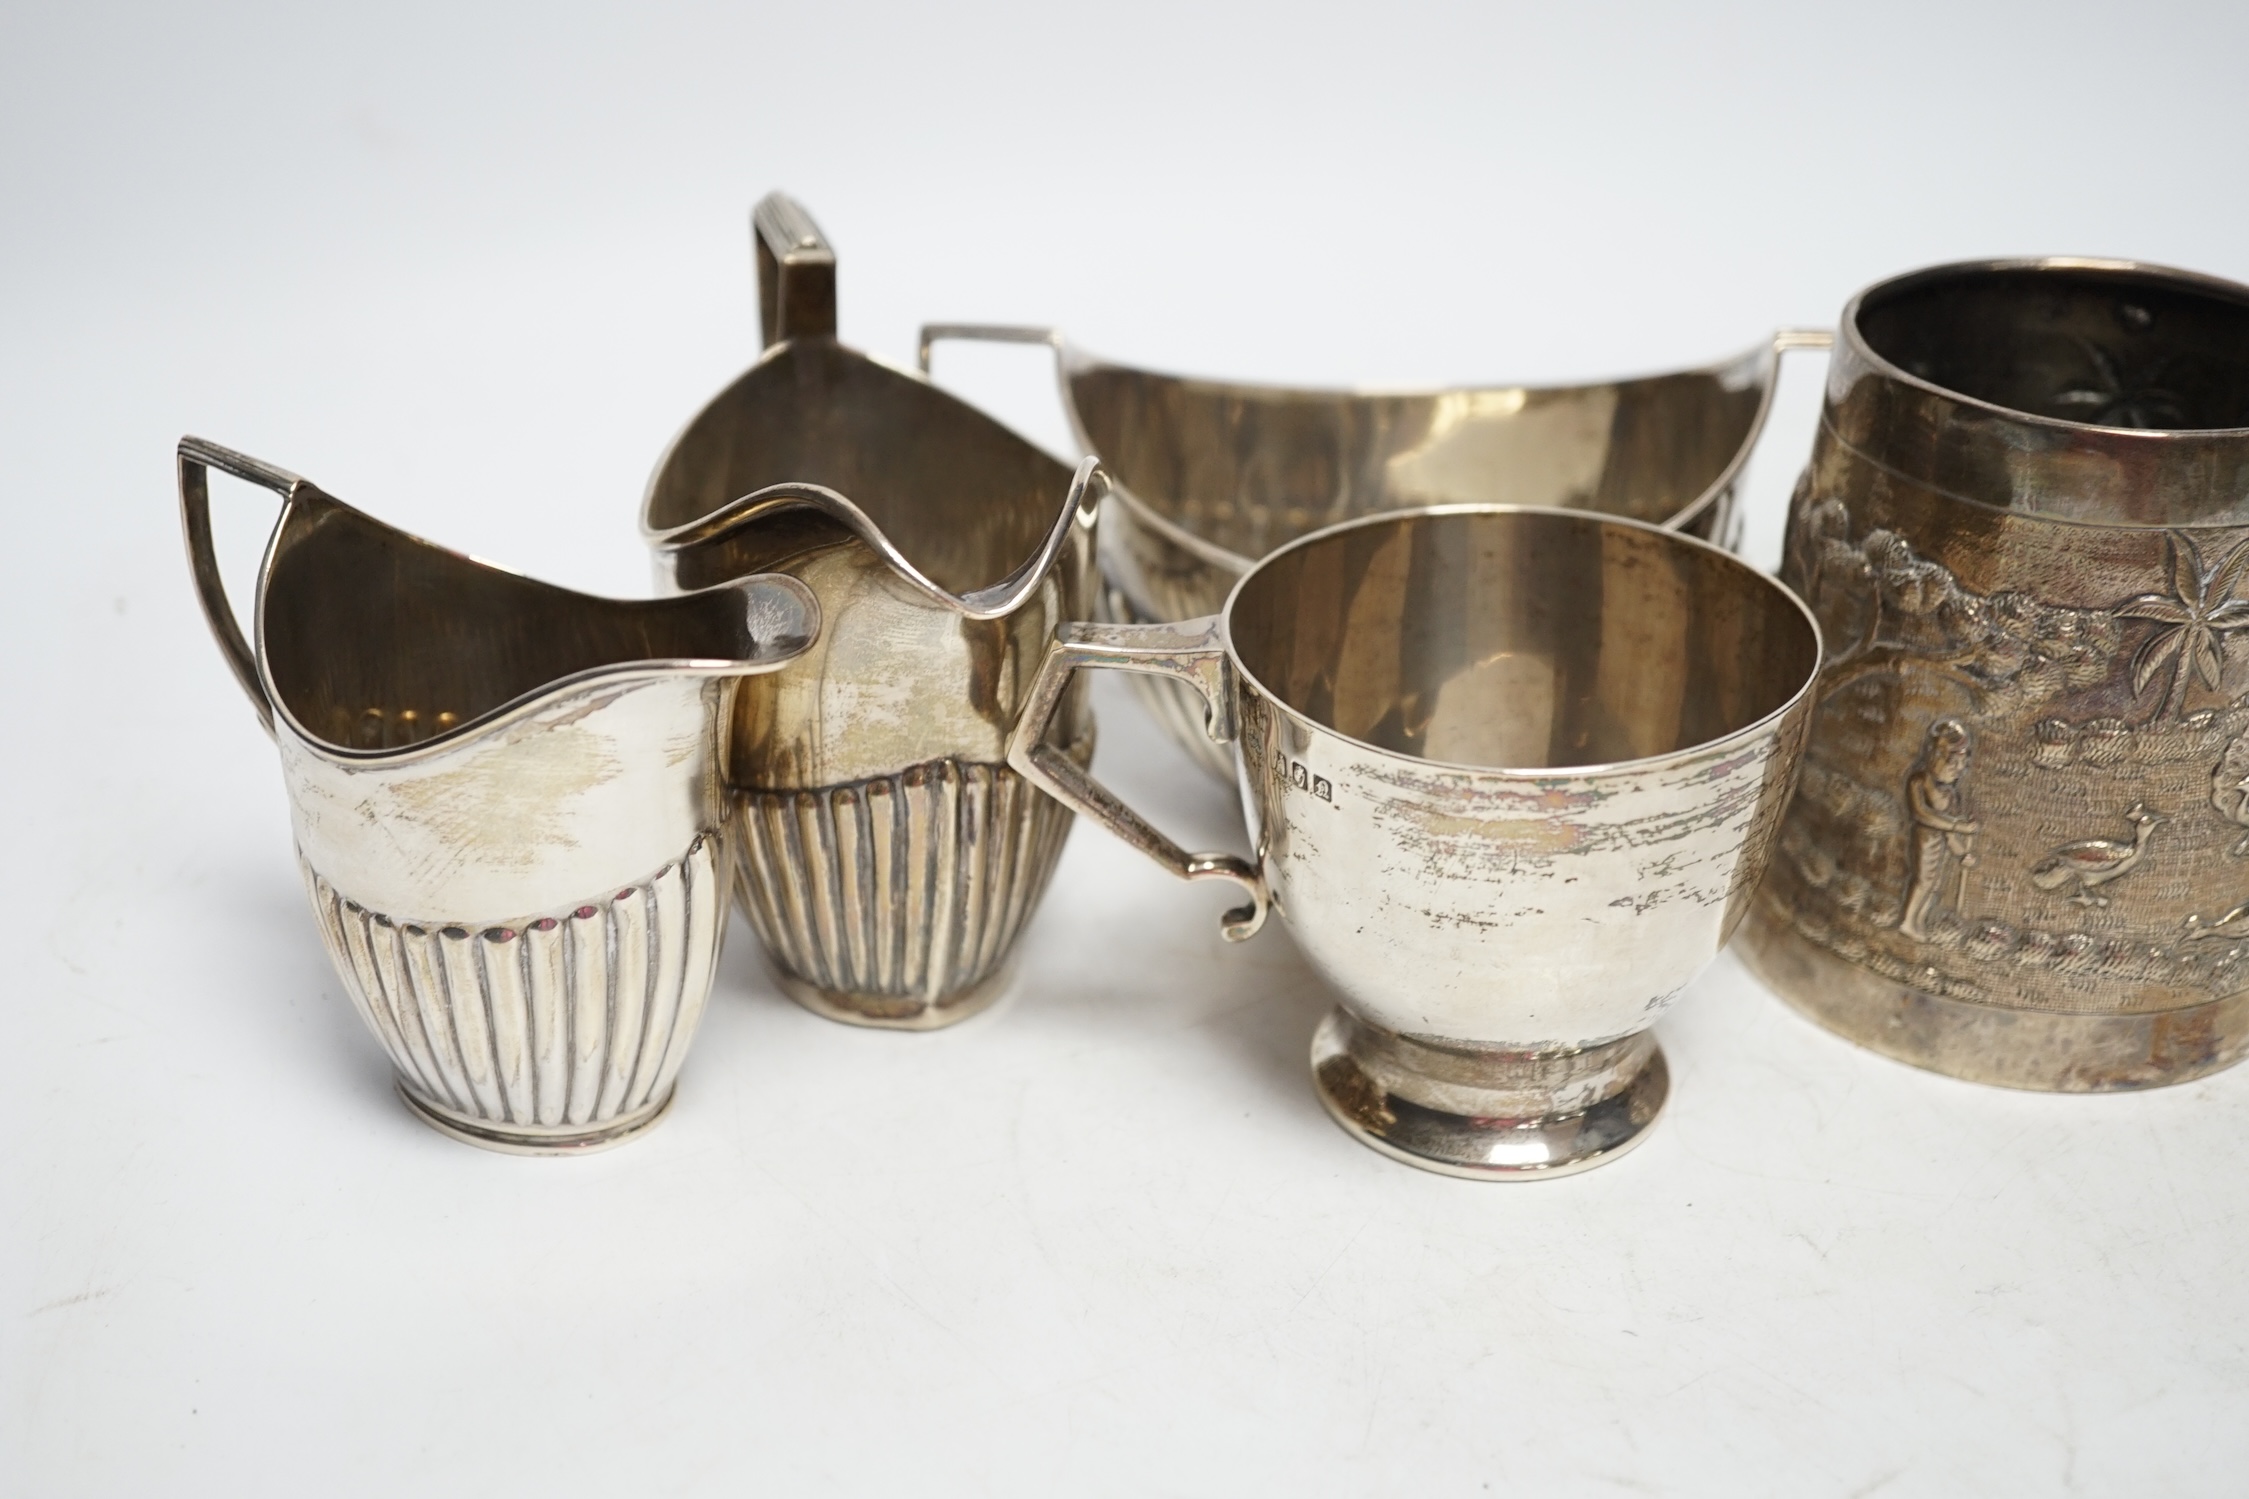 Two early 20th century demi-fluted silver cream jugs and a similar sugar bowl, an Irish silver tea cup and an Indian? white metal mug, gross weight 16.7oz. Fair condition.